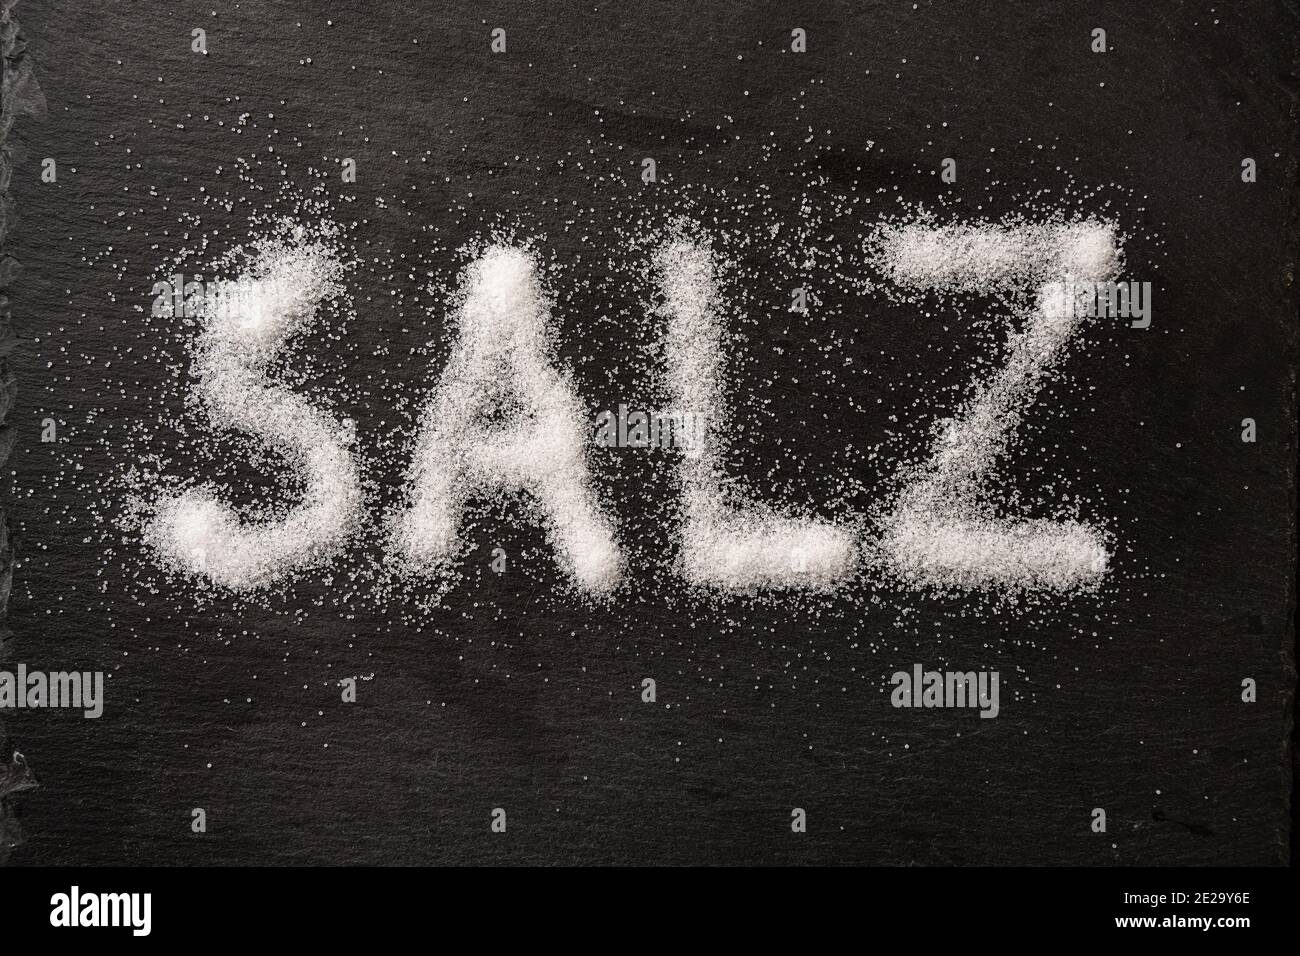 German word Salz (meaning salt) written with salt crystals on a dark slate, high angle view from above, selected focus Stock Photo